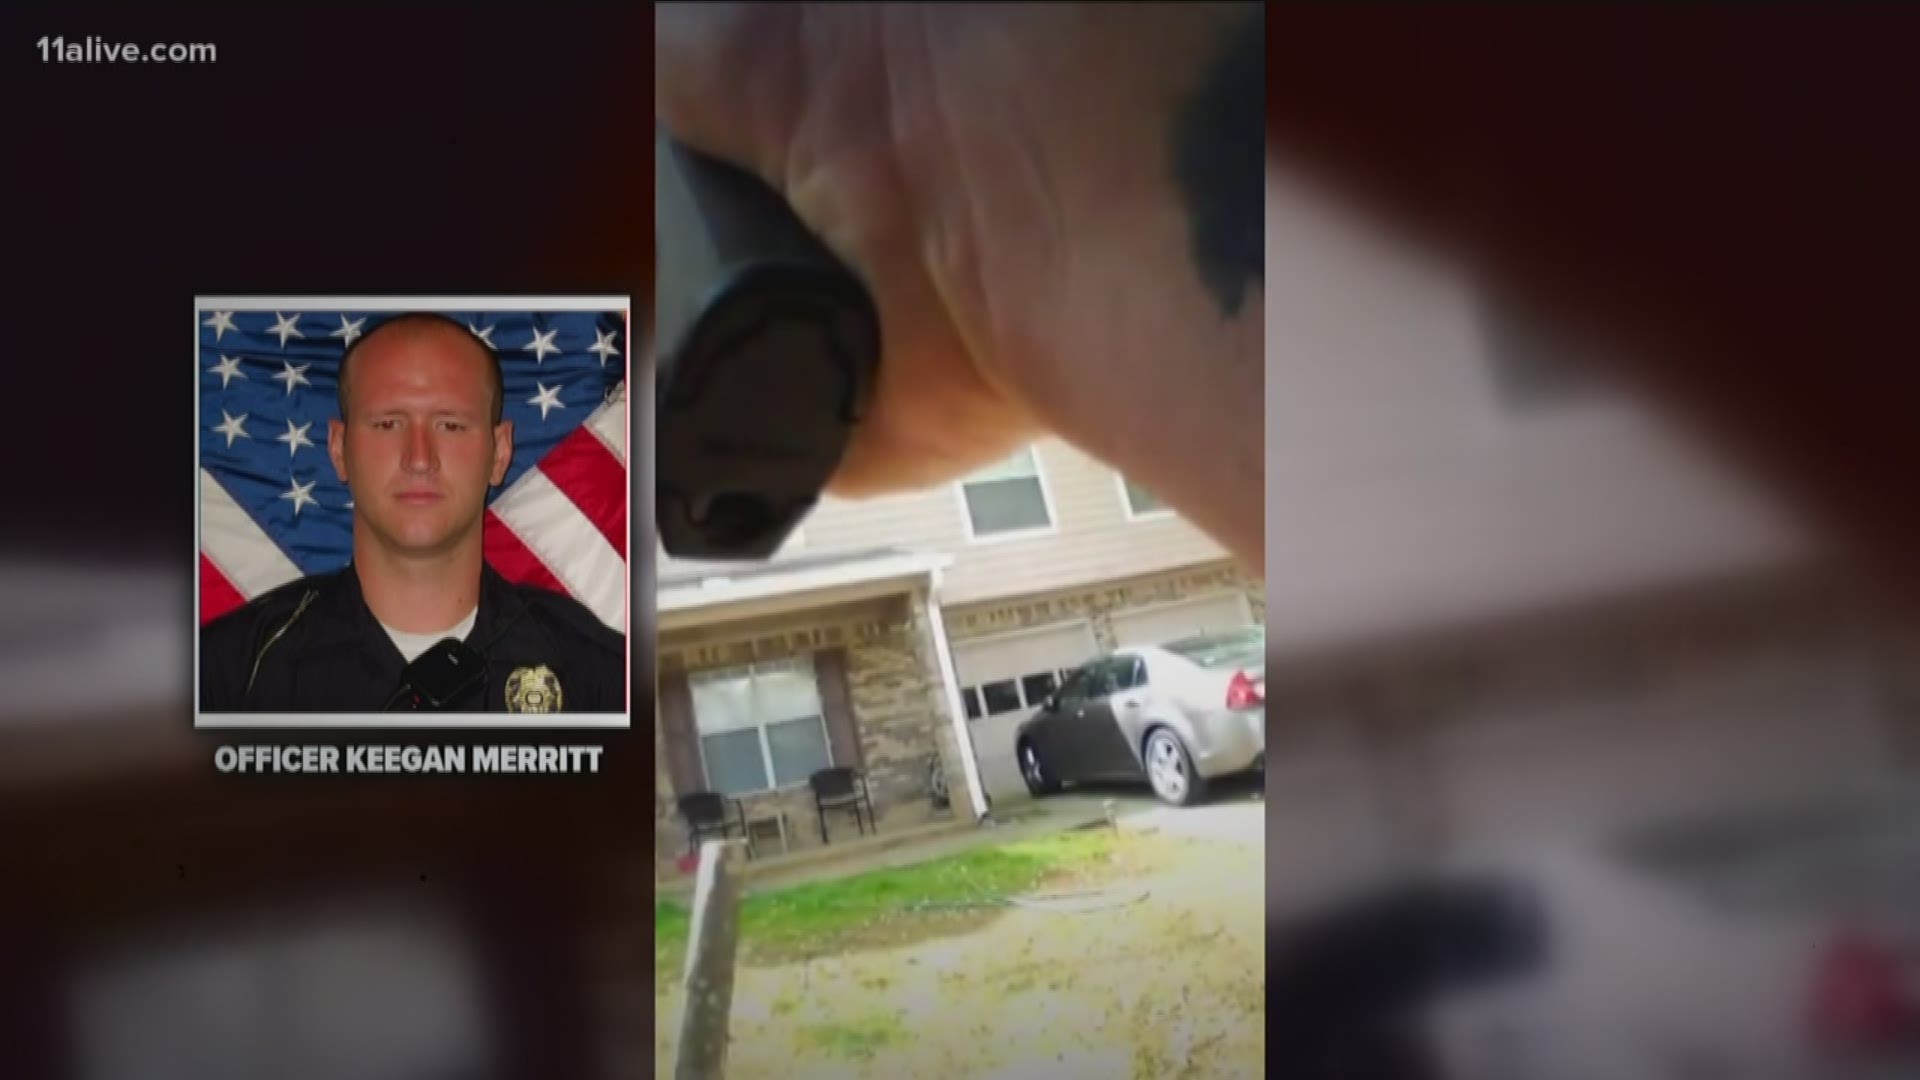 Henry County Police released bodycam video showing the moment officers kicked in the front door and met gunfire while responding to a call at a home on Thursday, along with the rescue of an officer from the home after he was shot.